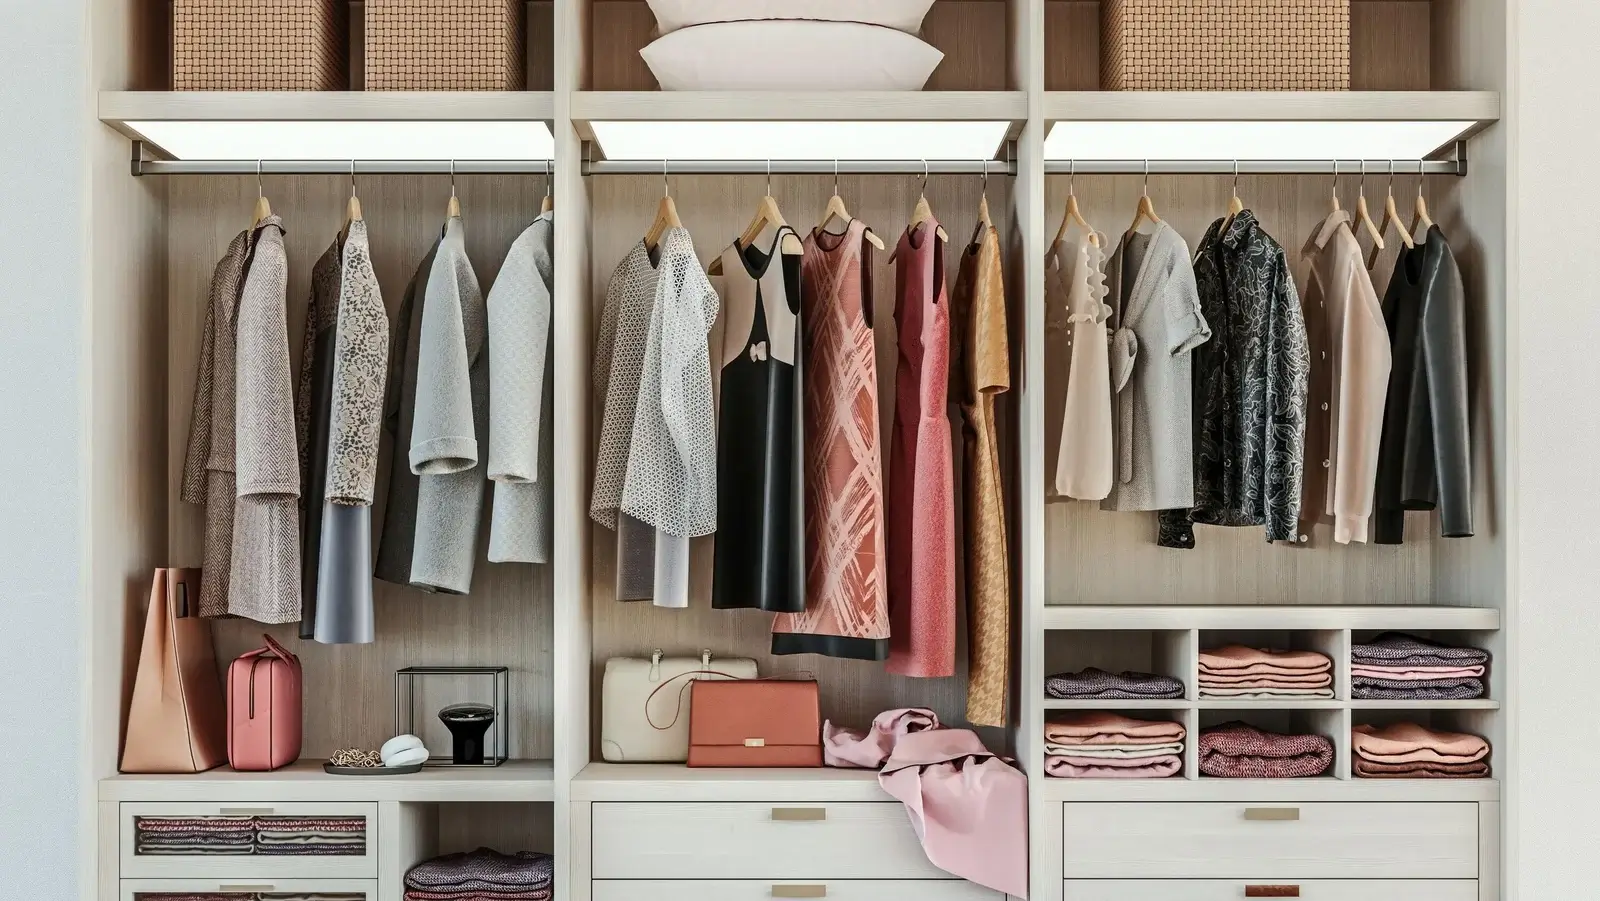 Wardrobe to Attract the Right Partner